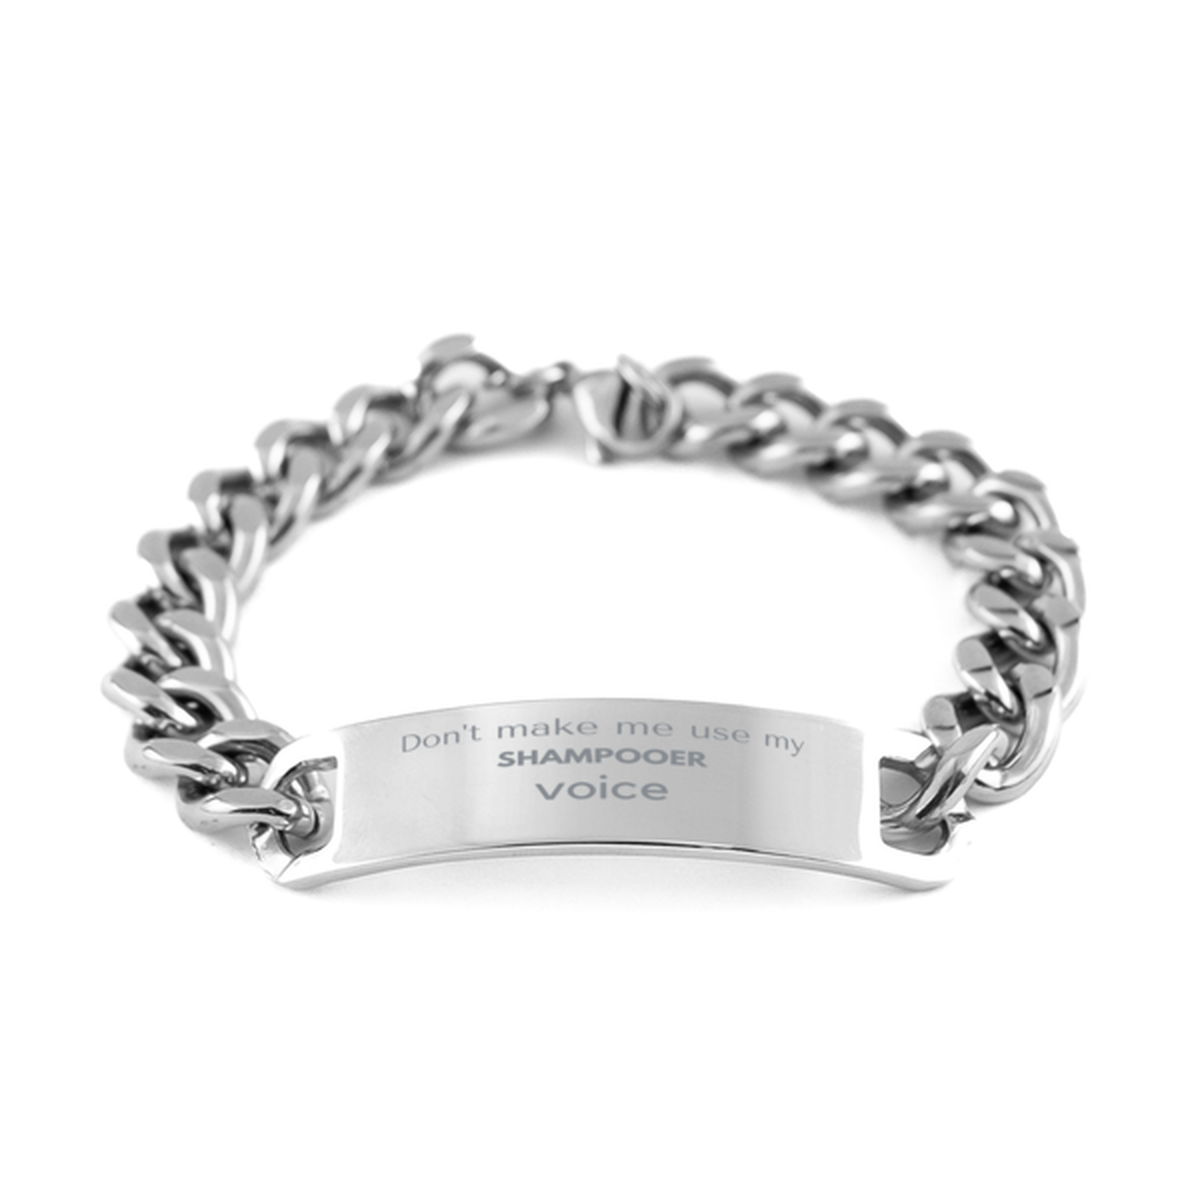 Don't make me use my Shampooer voice, Sarcasm Shampooer Gifts, Christmas Shampooer Cuban Chain Stainless Steel Bracelet Birthday Unique Gifts For Shampooer Coworkers, Men, Women, Colleague, Friends